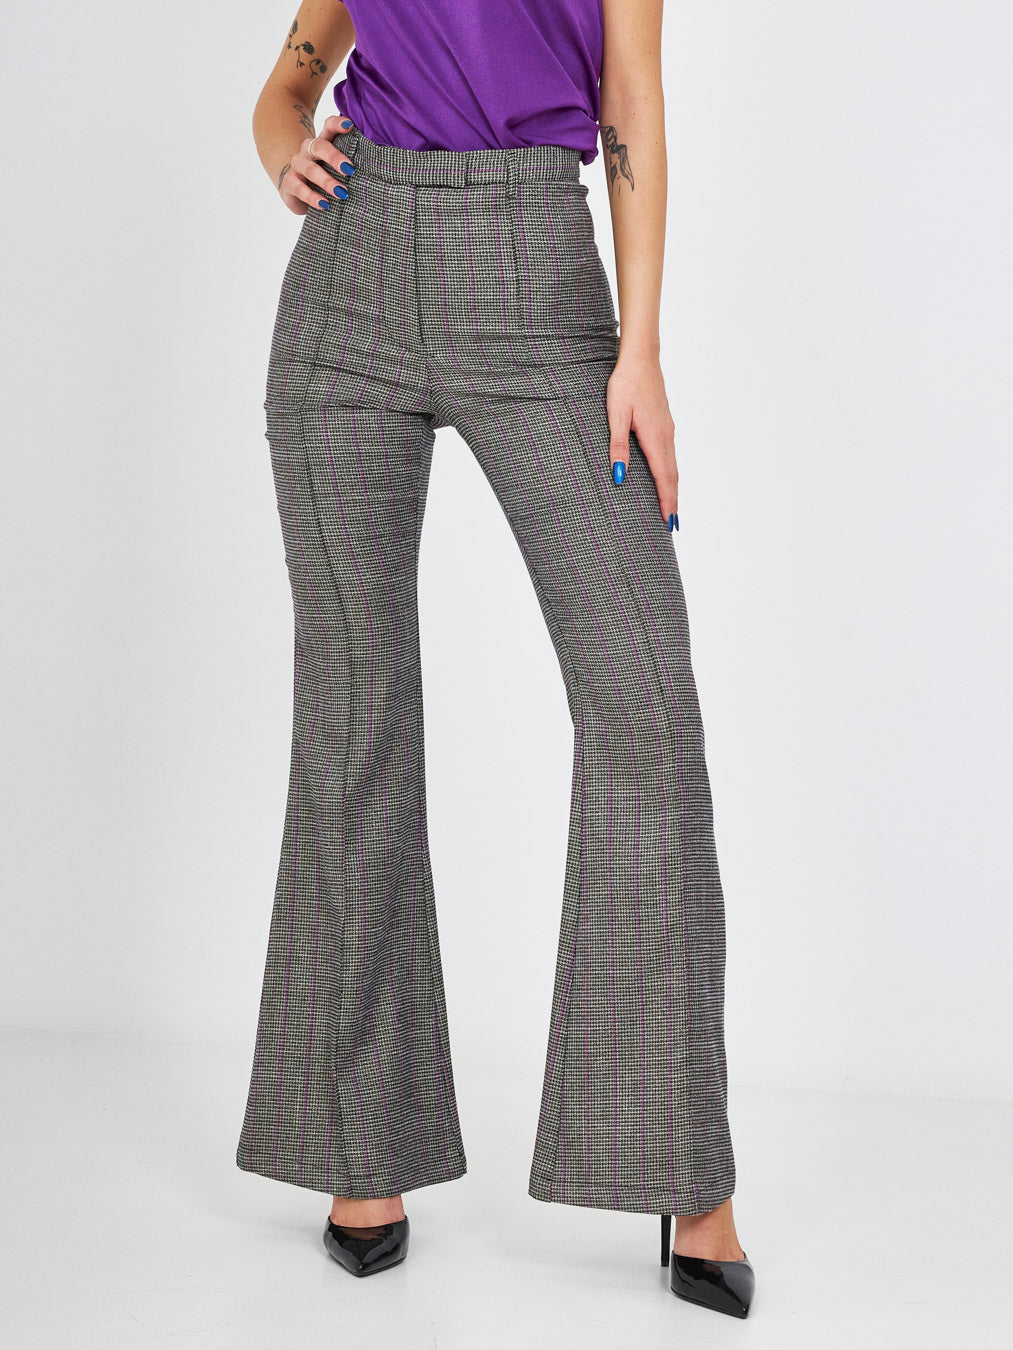 Matilde Couture flared trousers